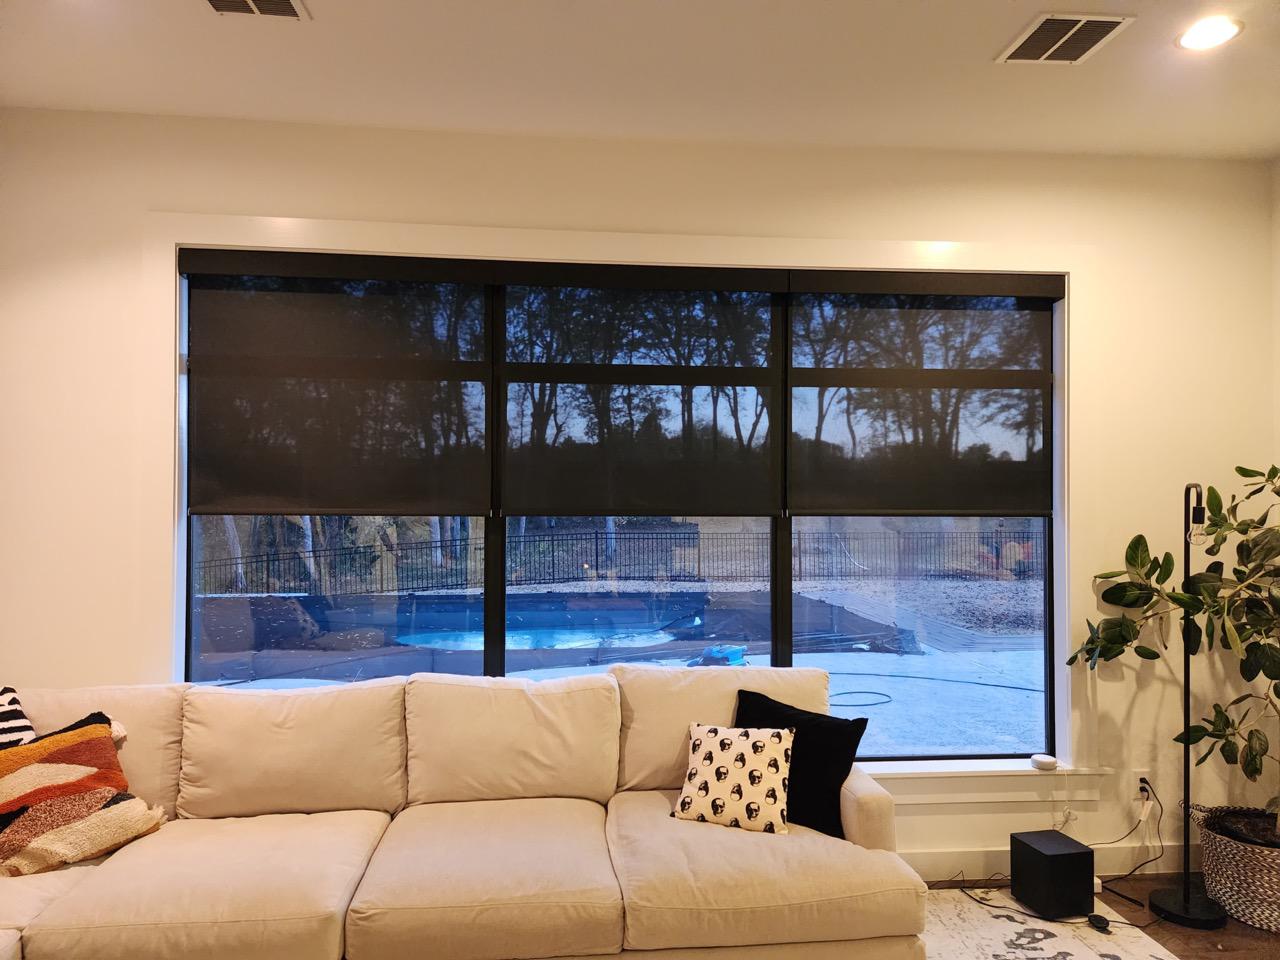 While extremely effective, you might be hesitant to buy Solar Roller Shades as they wouldn't go well with your minimalistic interiors. Well, our Solar Shades come in a variety of colors and patterns, ensuring you get exactly what you want for your house in Claremore.